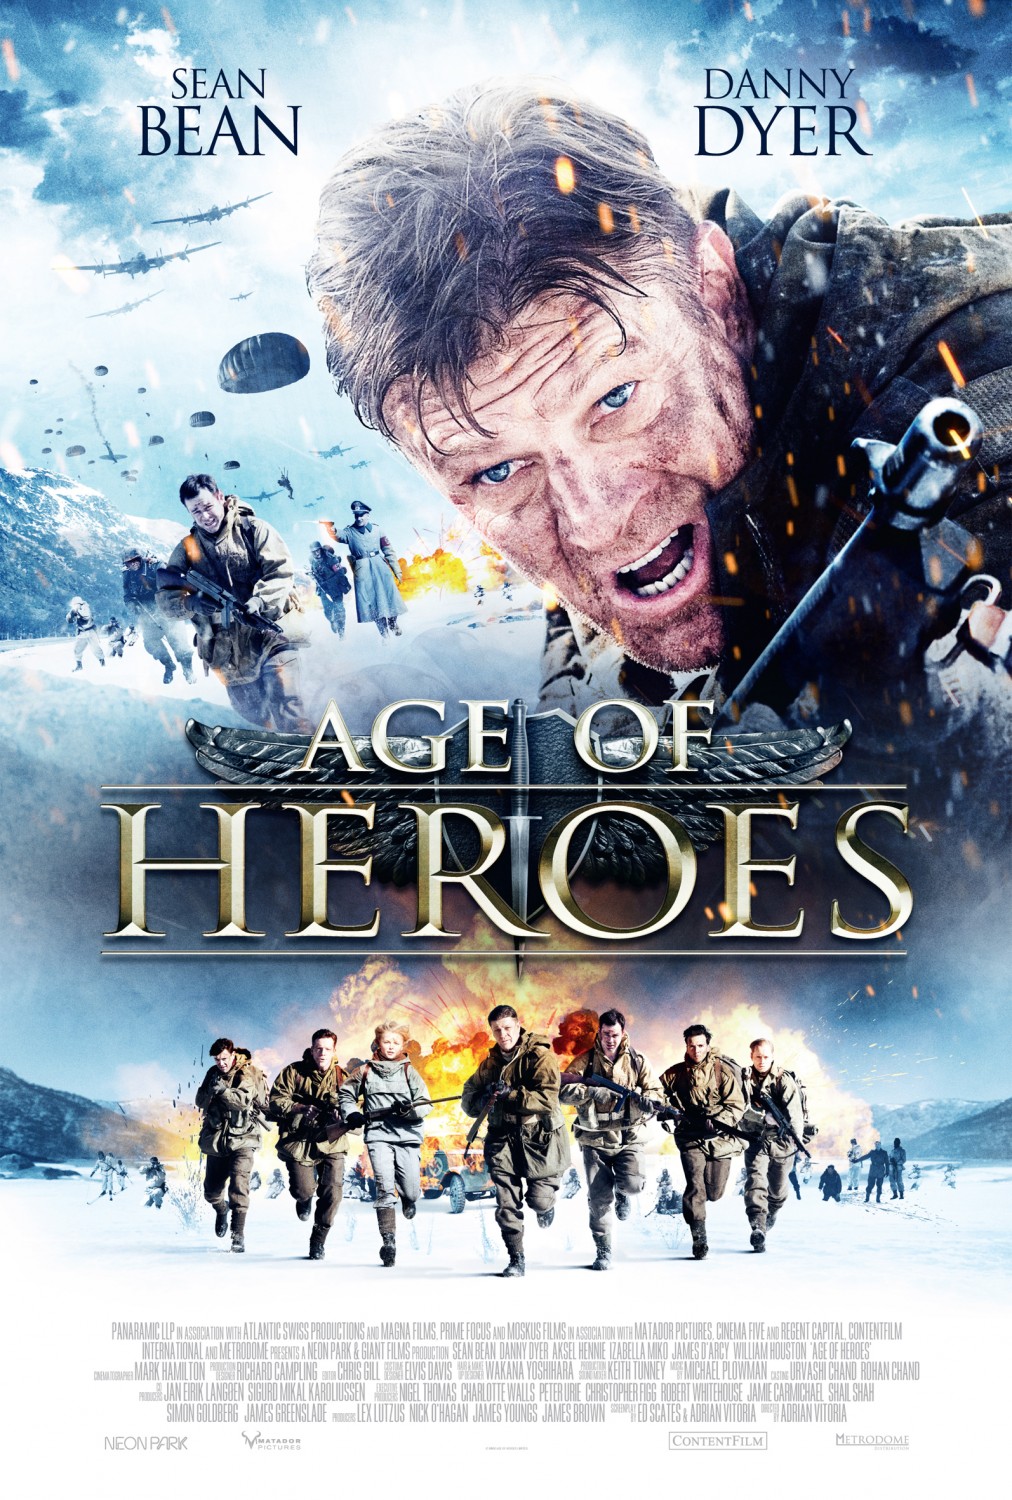 IMP Awards > 2011 Movie Poster Gallery > Age of Heroes > XLG Image